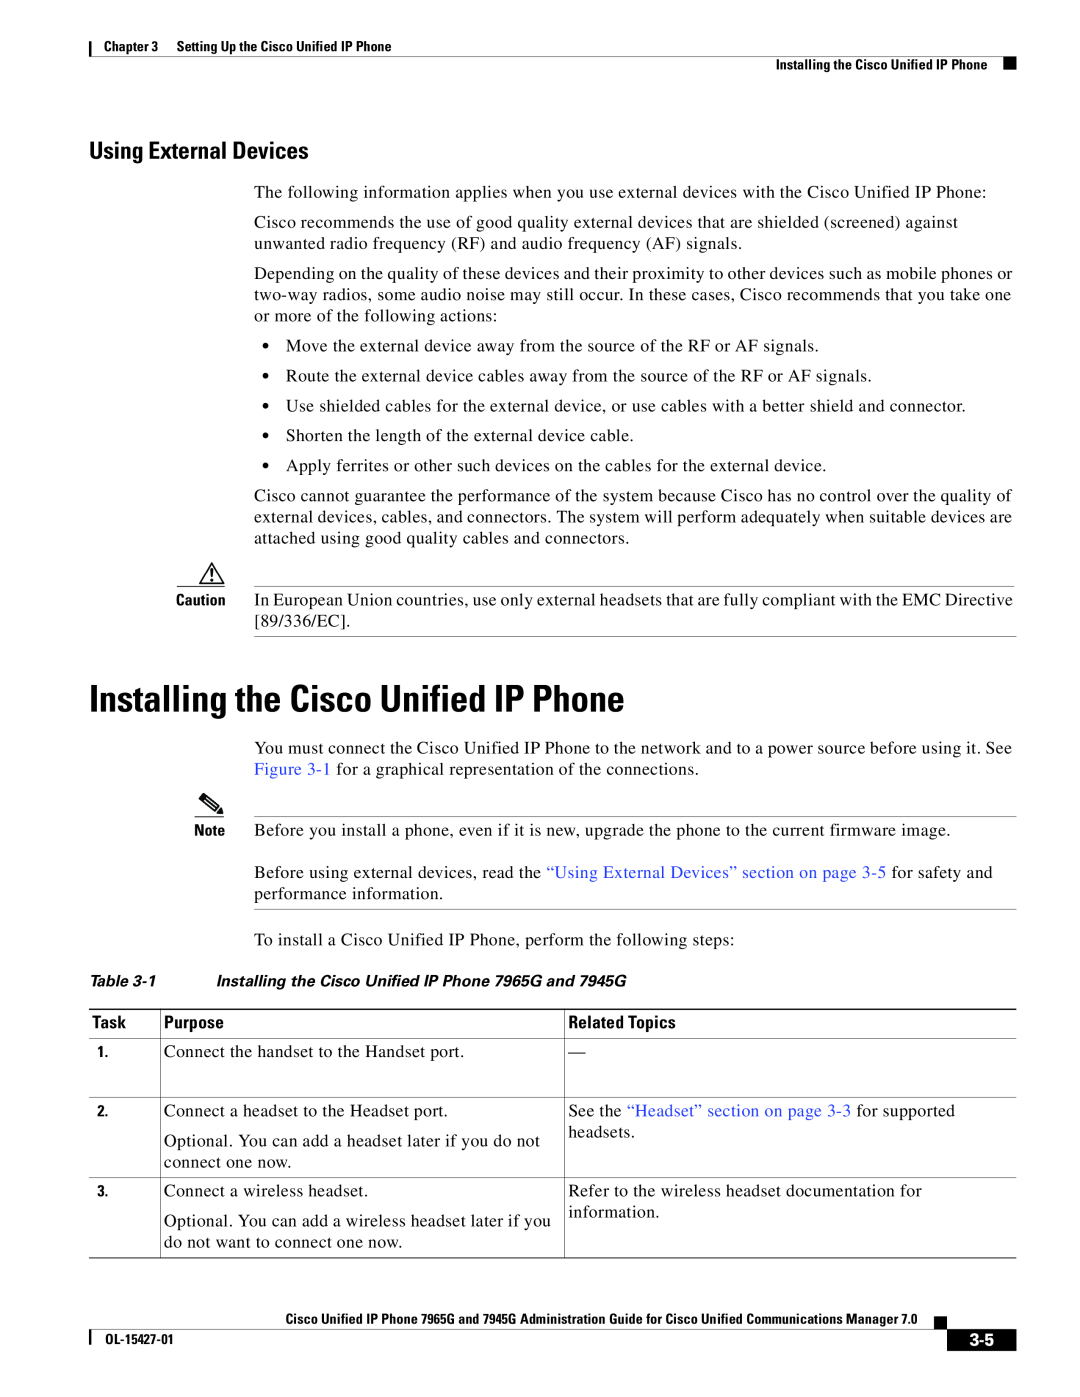 Cisco Systems 7945G, 7965G manual Installing the Cisco Unified IP Phone, Using External Devices, Purpose, Related Topics 